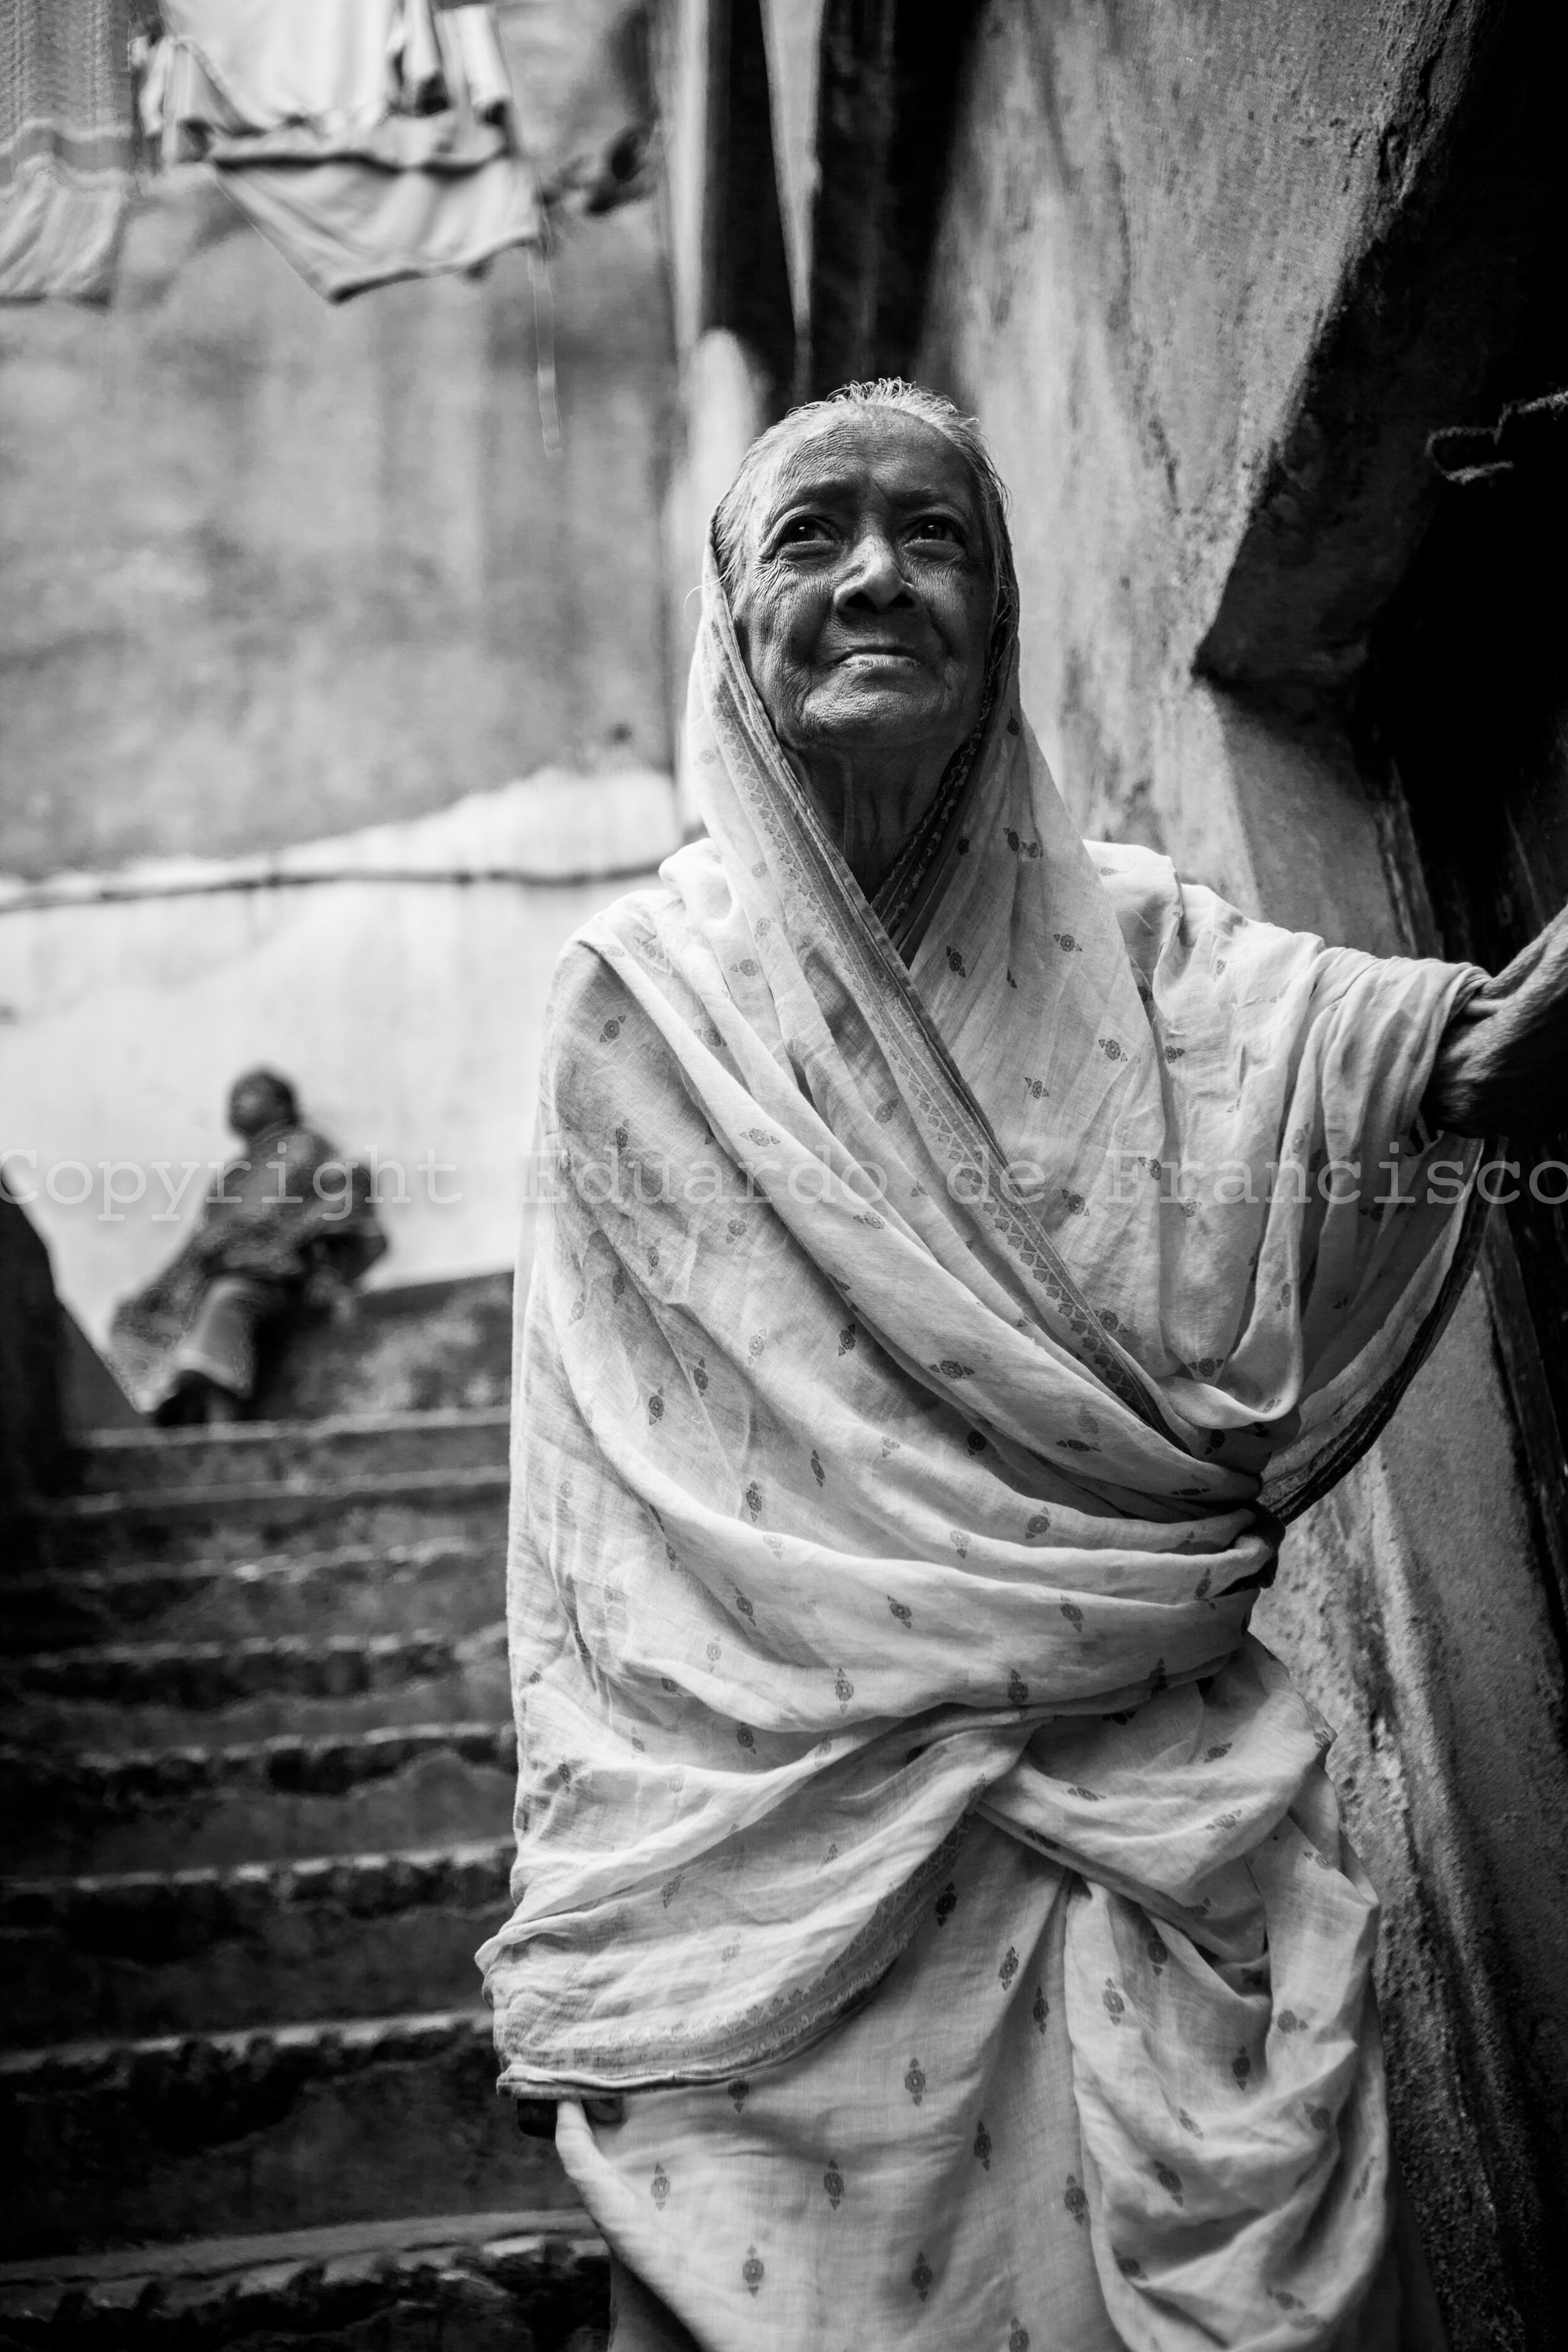  Pushpo Das, 82 years old. She arrived to Sonagachi when she was 15, thinking that she would work as a maid. She was then forced to prostitution and stayed like that for the following 40 years. She later on worked as a servant. In an example of the r